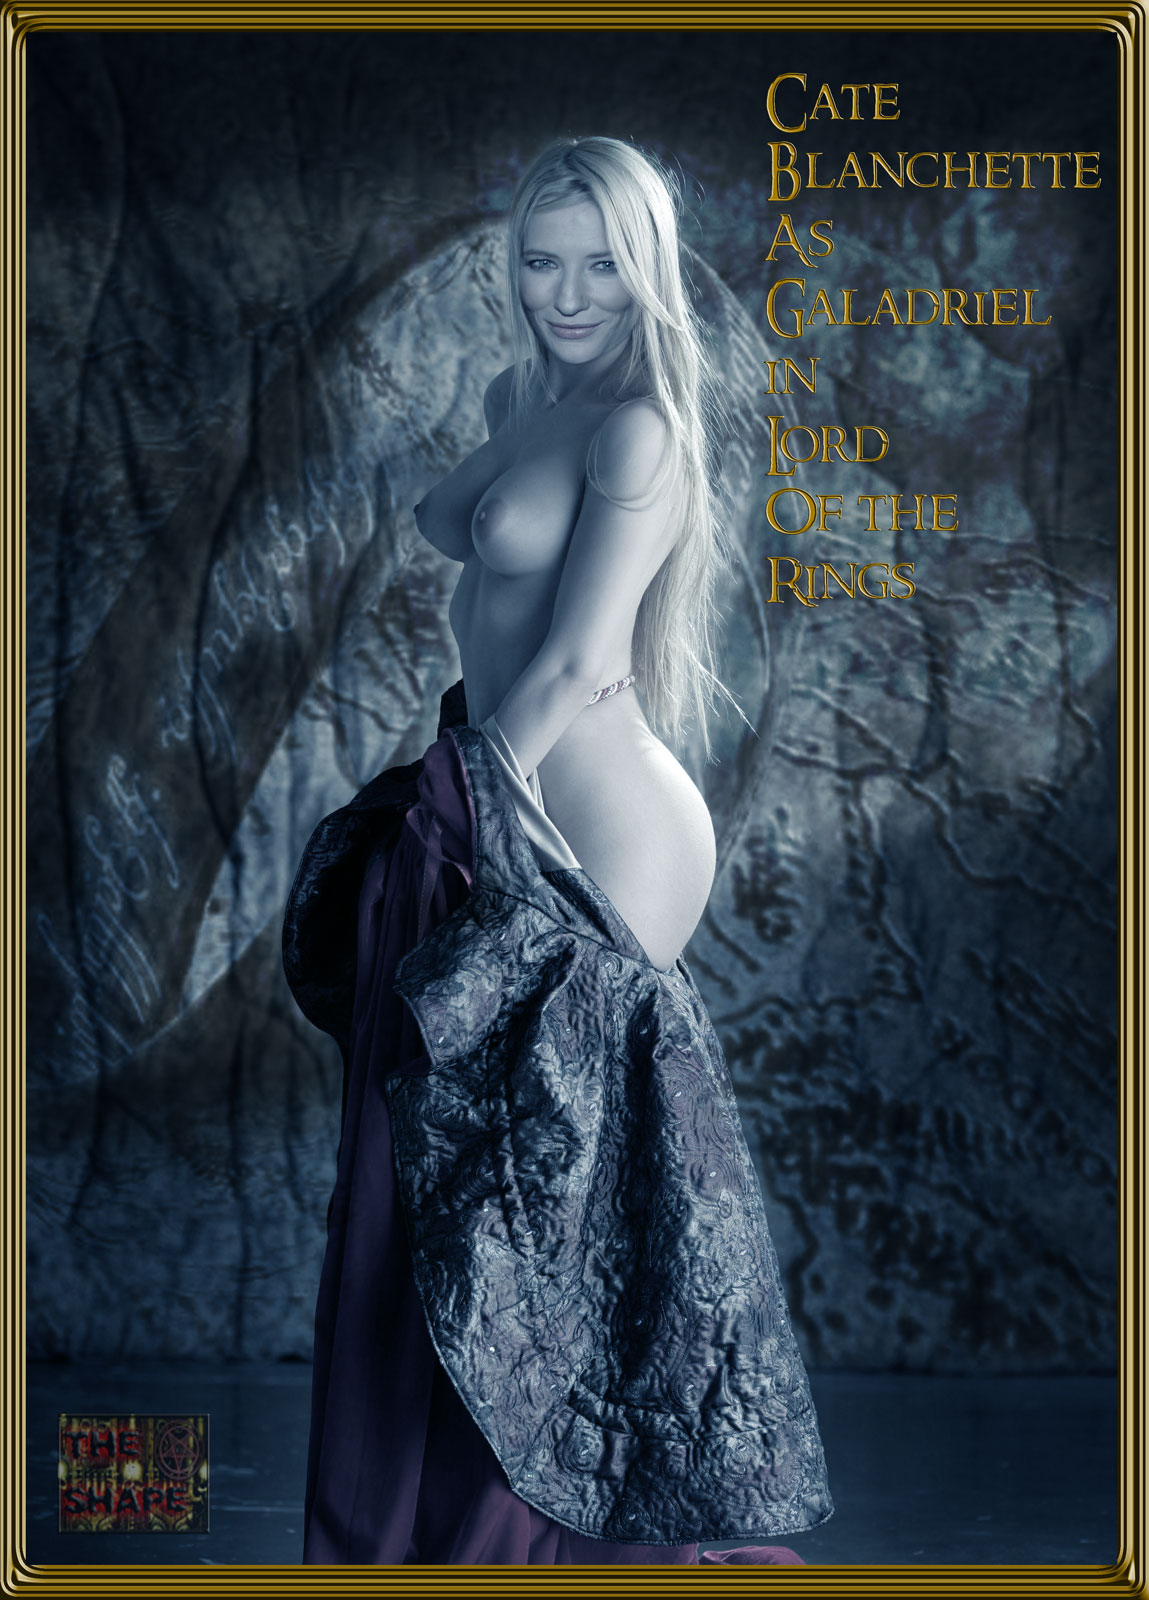 Lord Of The Rings Galadriel Porn - Lady galadriel naked â €" Homemade ...